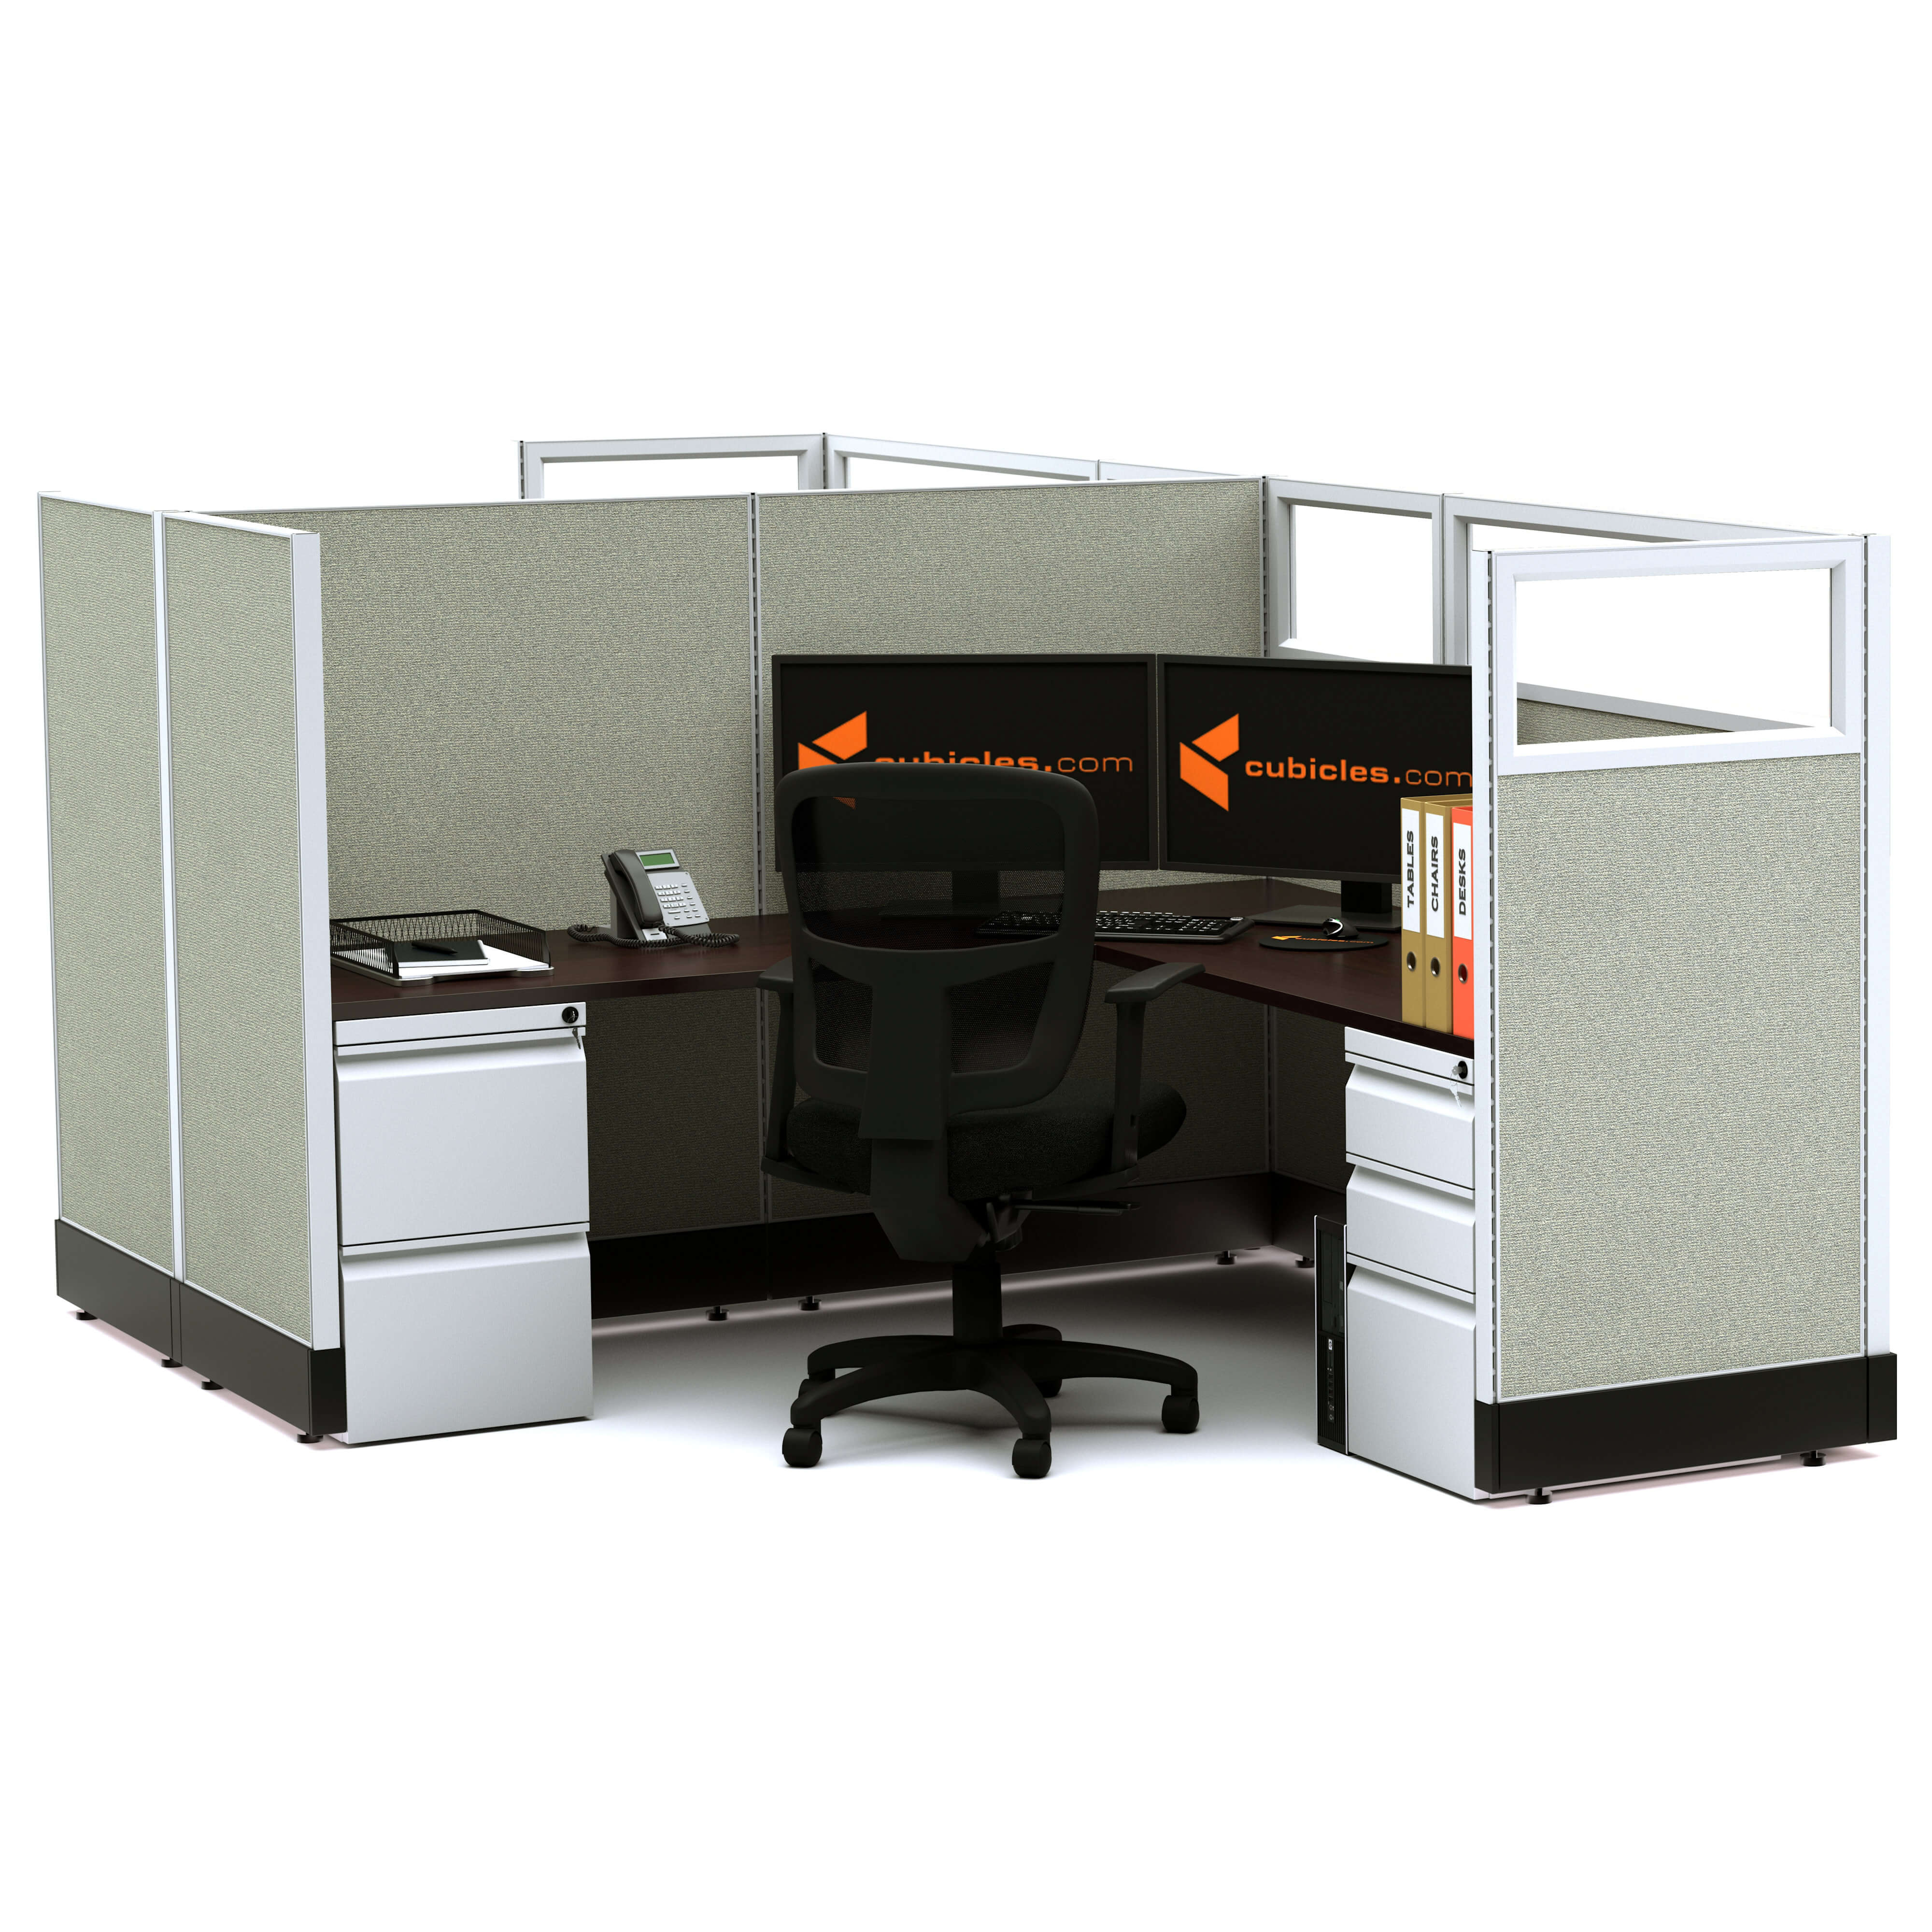 modular-office-furniture-partial-glass-office-cubicles-53h-2pack-cluster-powered.jpg